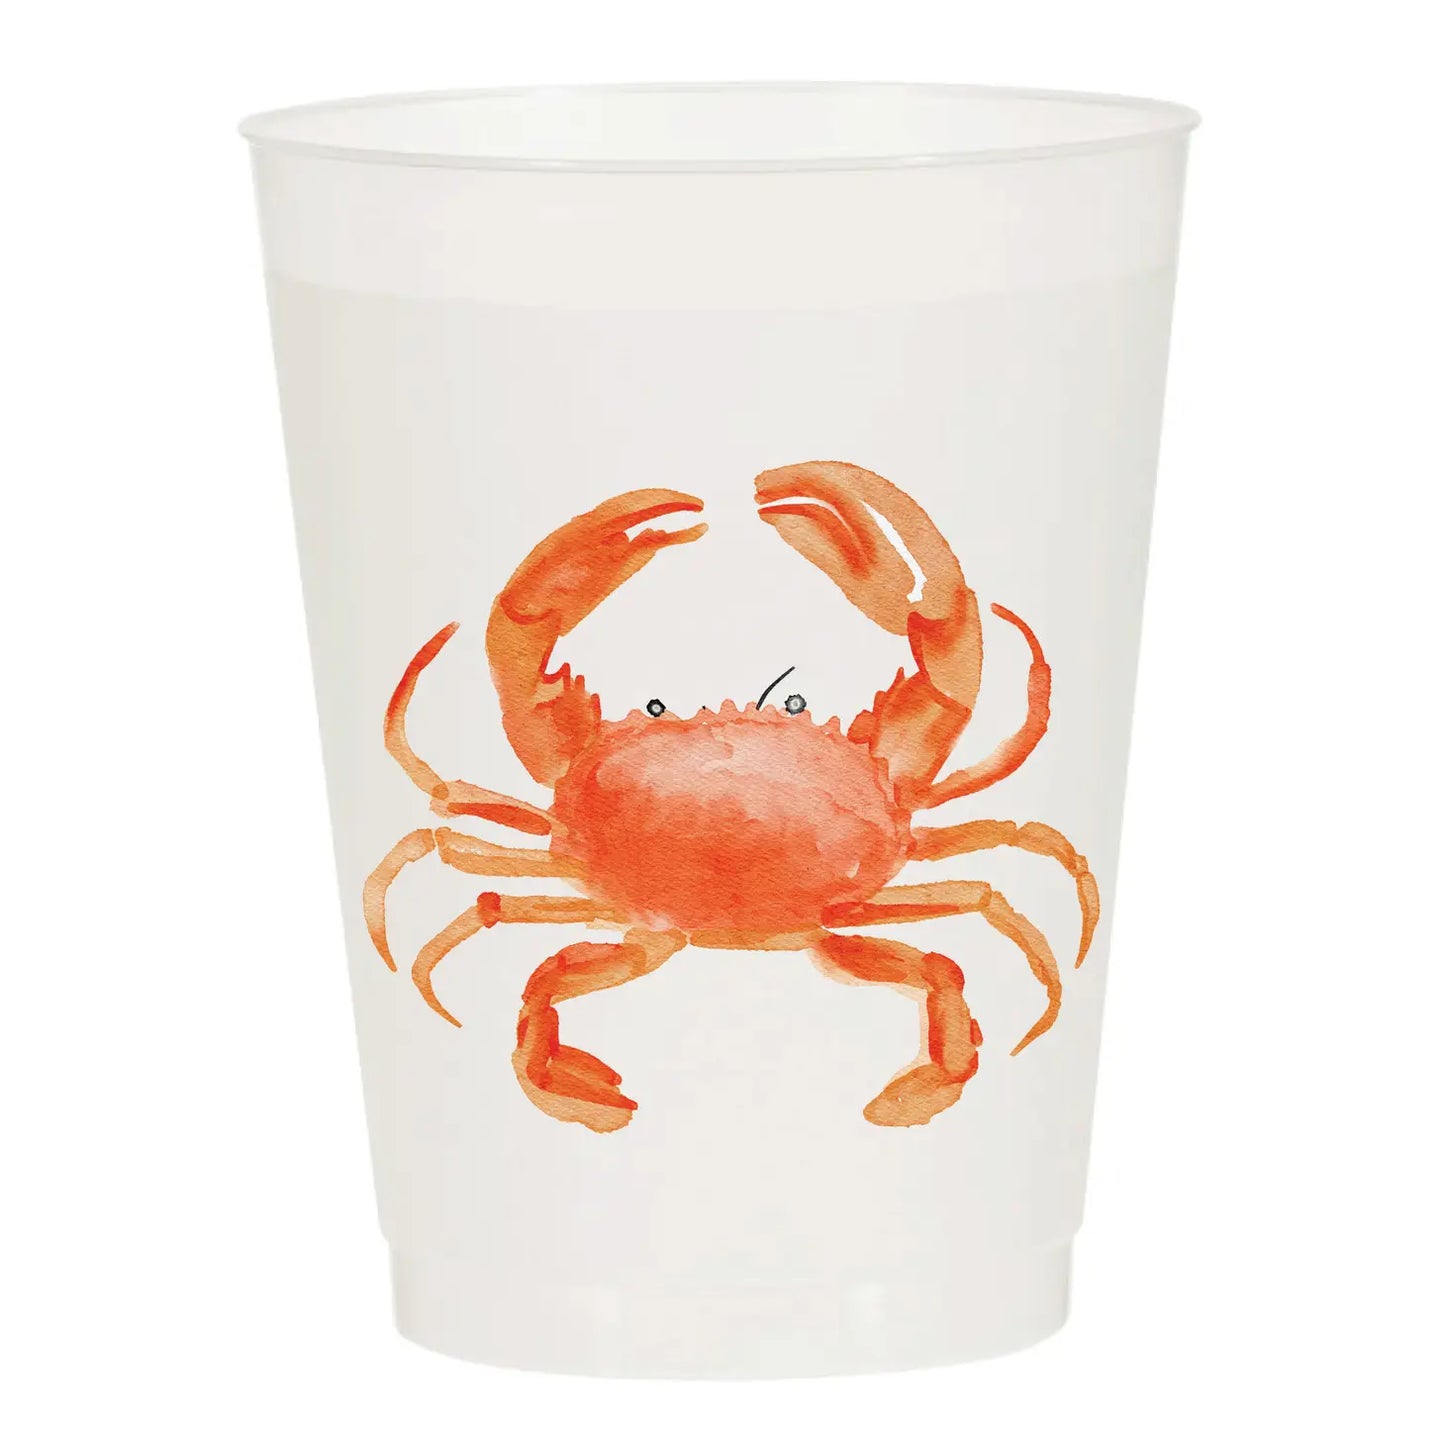 Stone Crab Frosted Cups 6 pk Cups